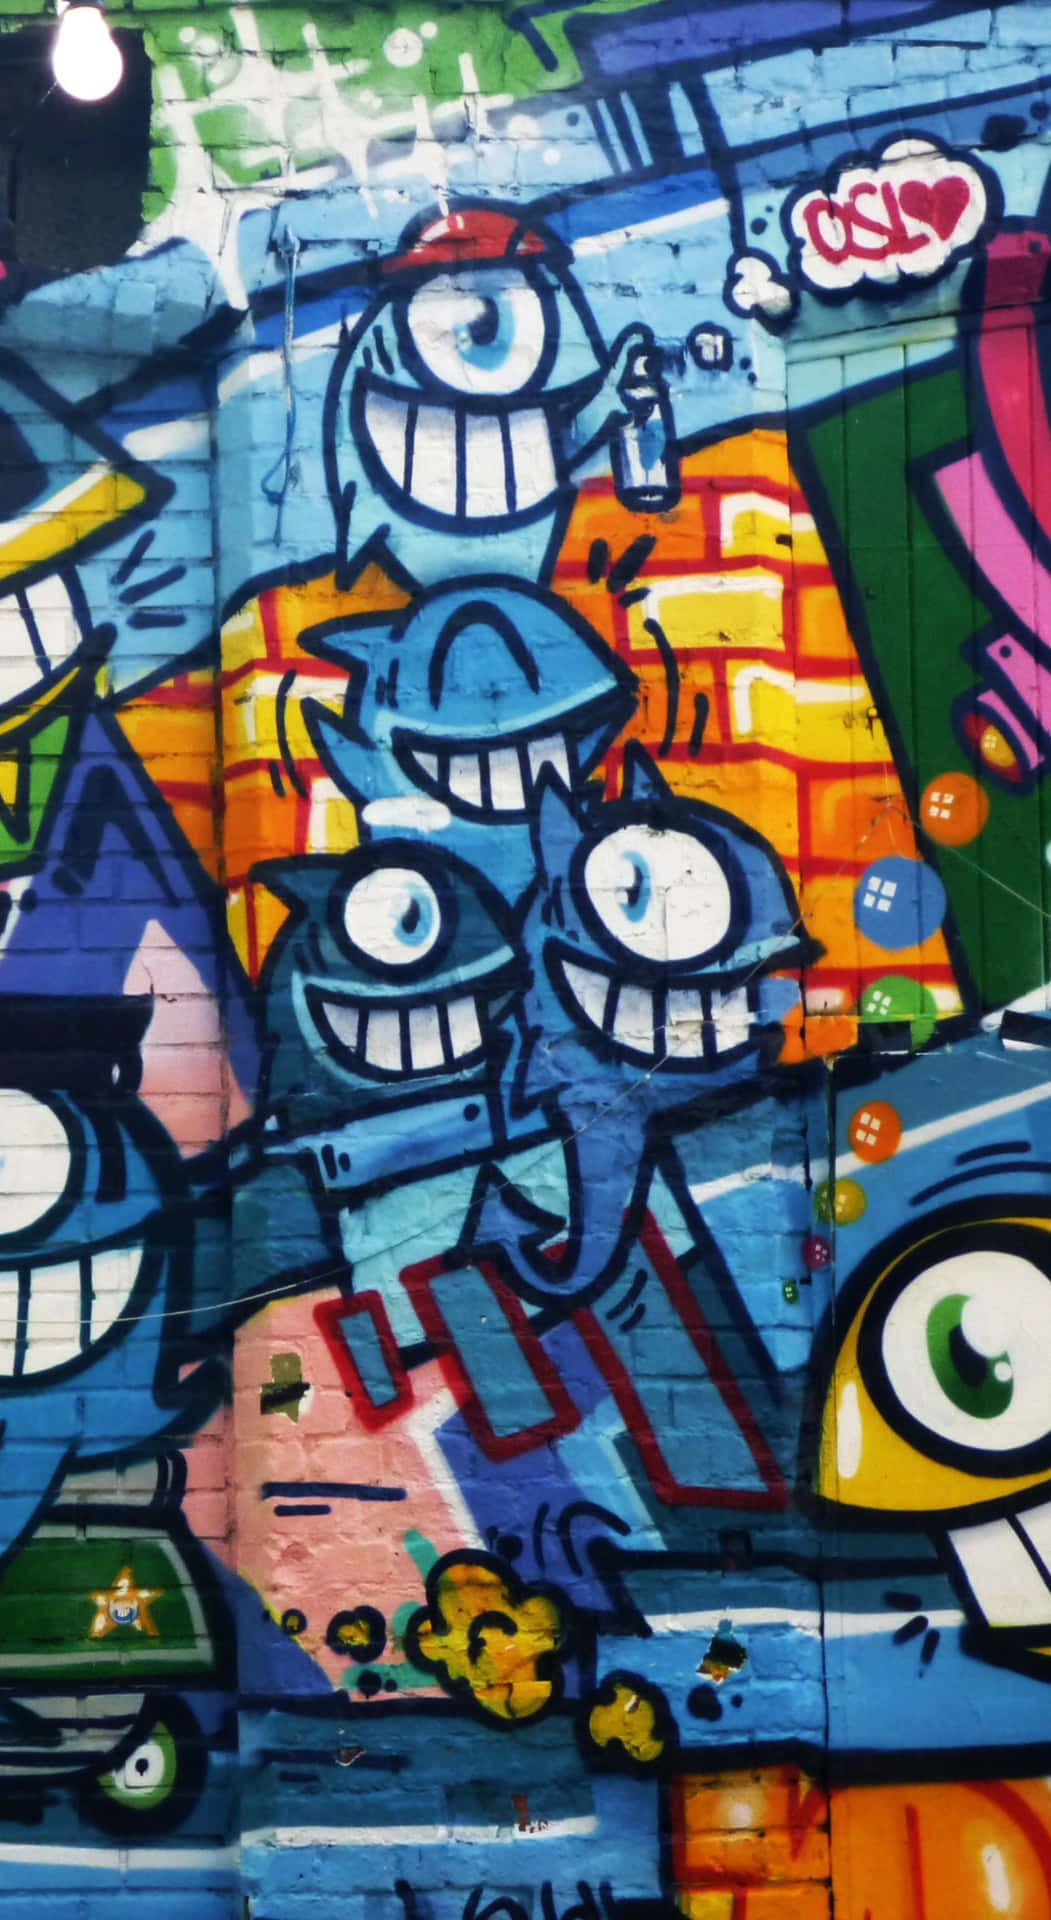 Graffiti Wall Art With One-eyed Creatures Wallpaper